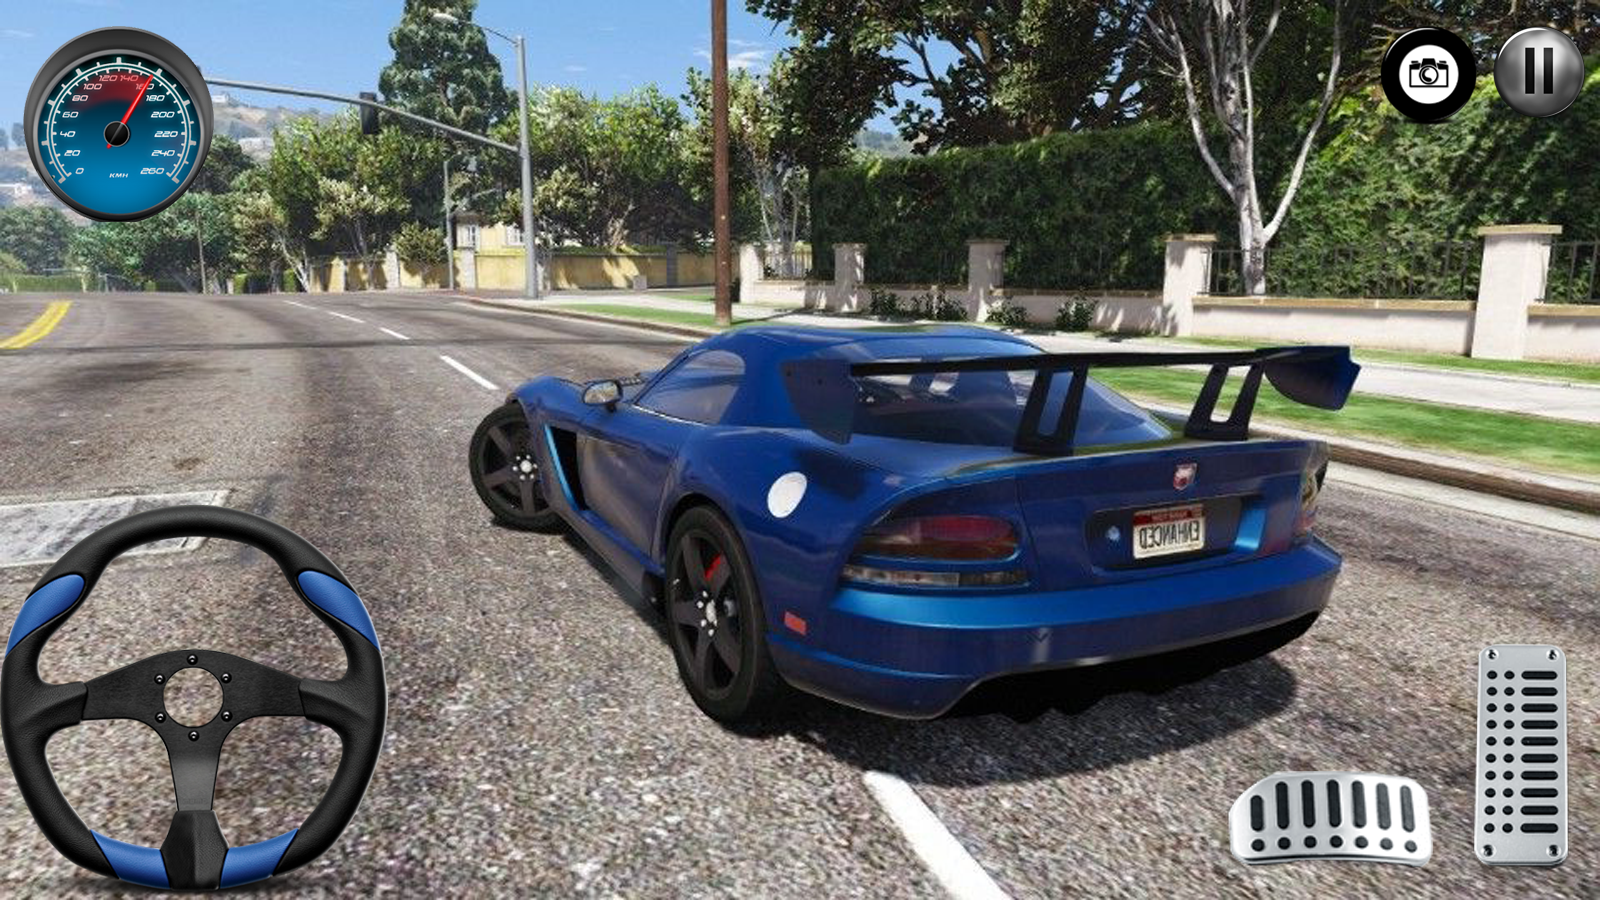 Self Drive Dodge Viper - Carbon Academy for Android - APK Download - 